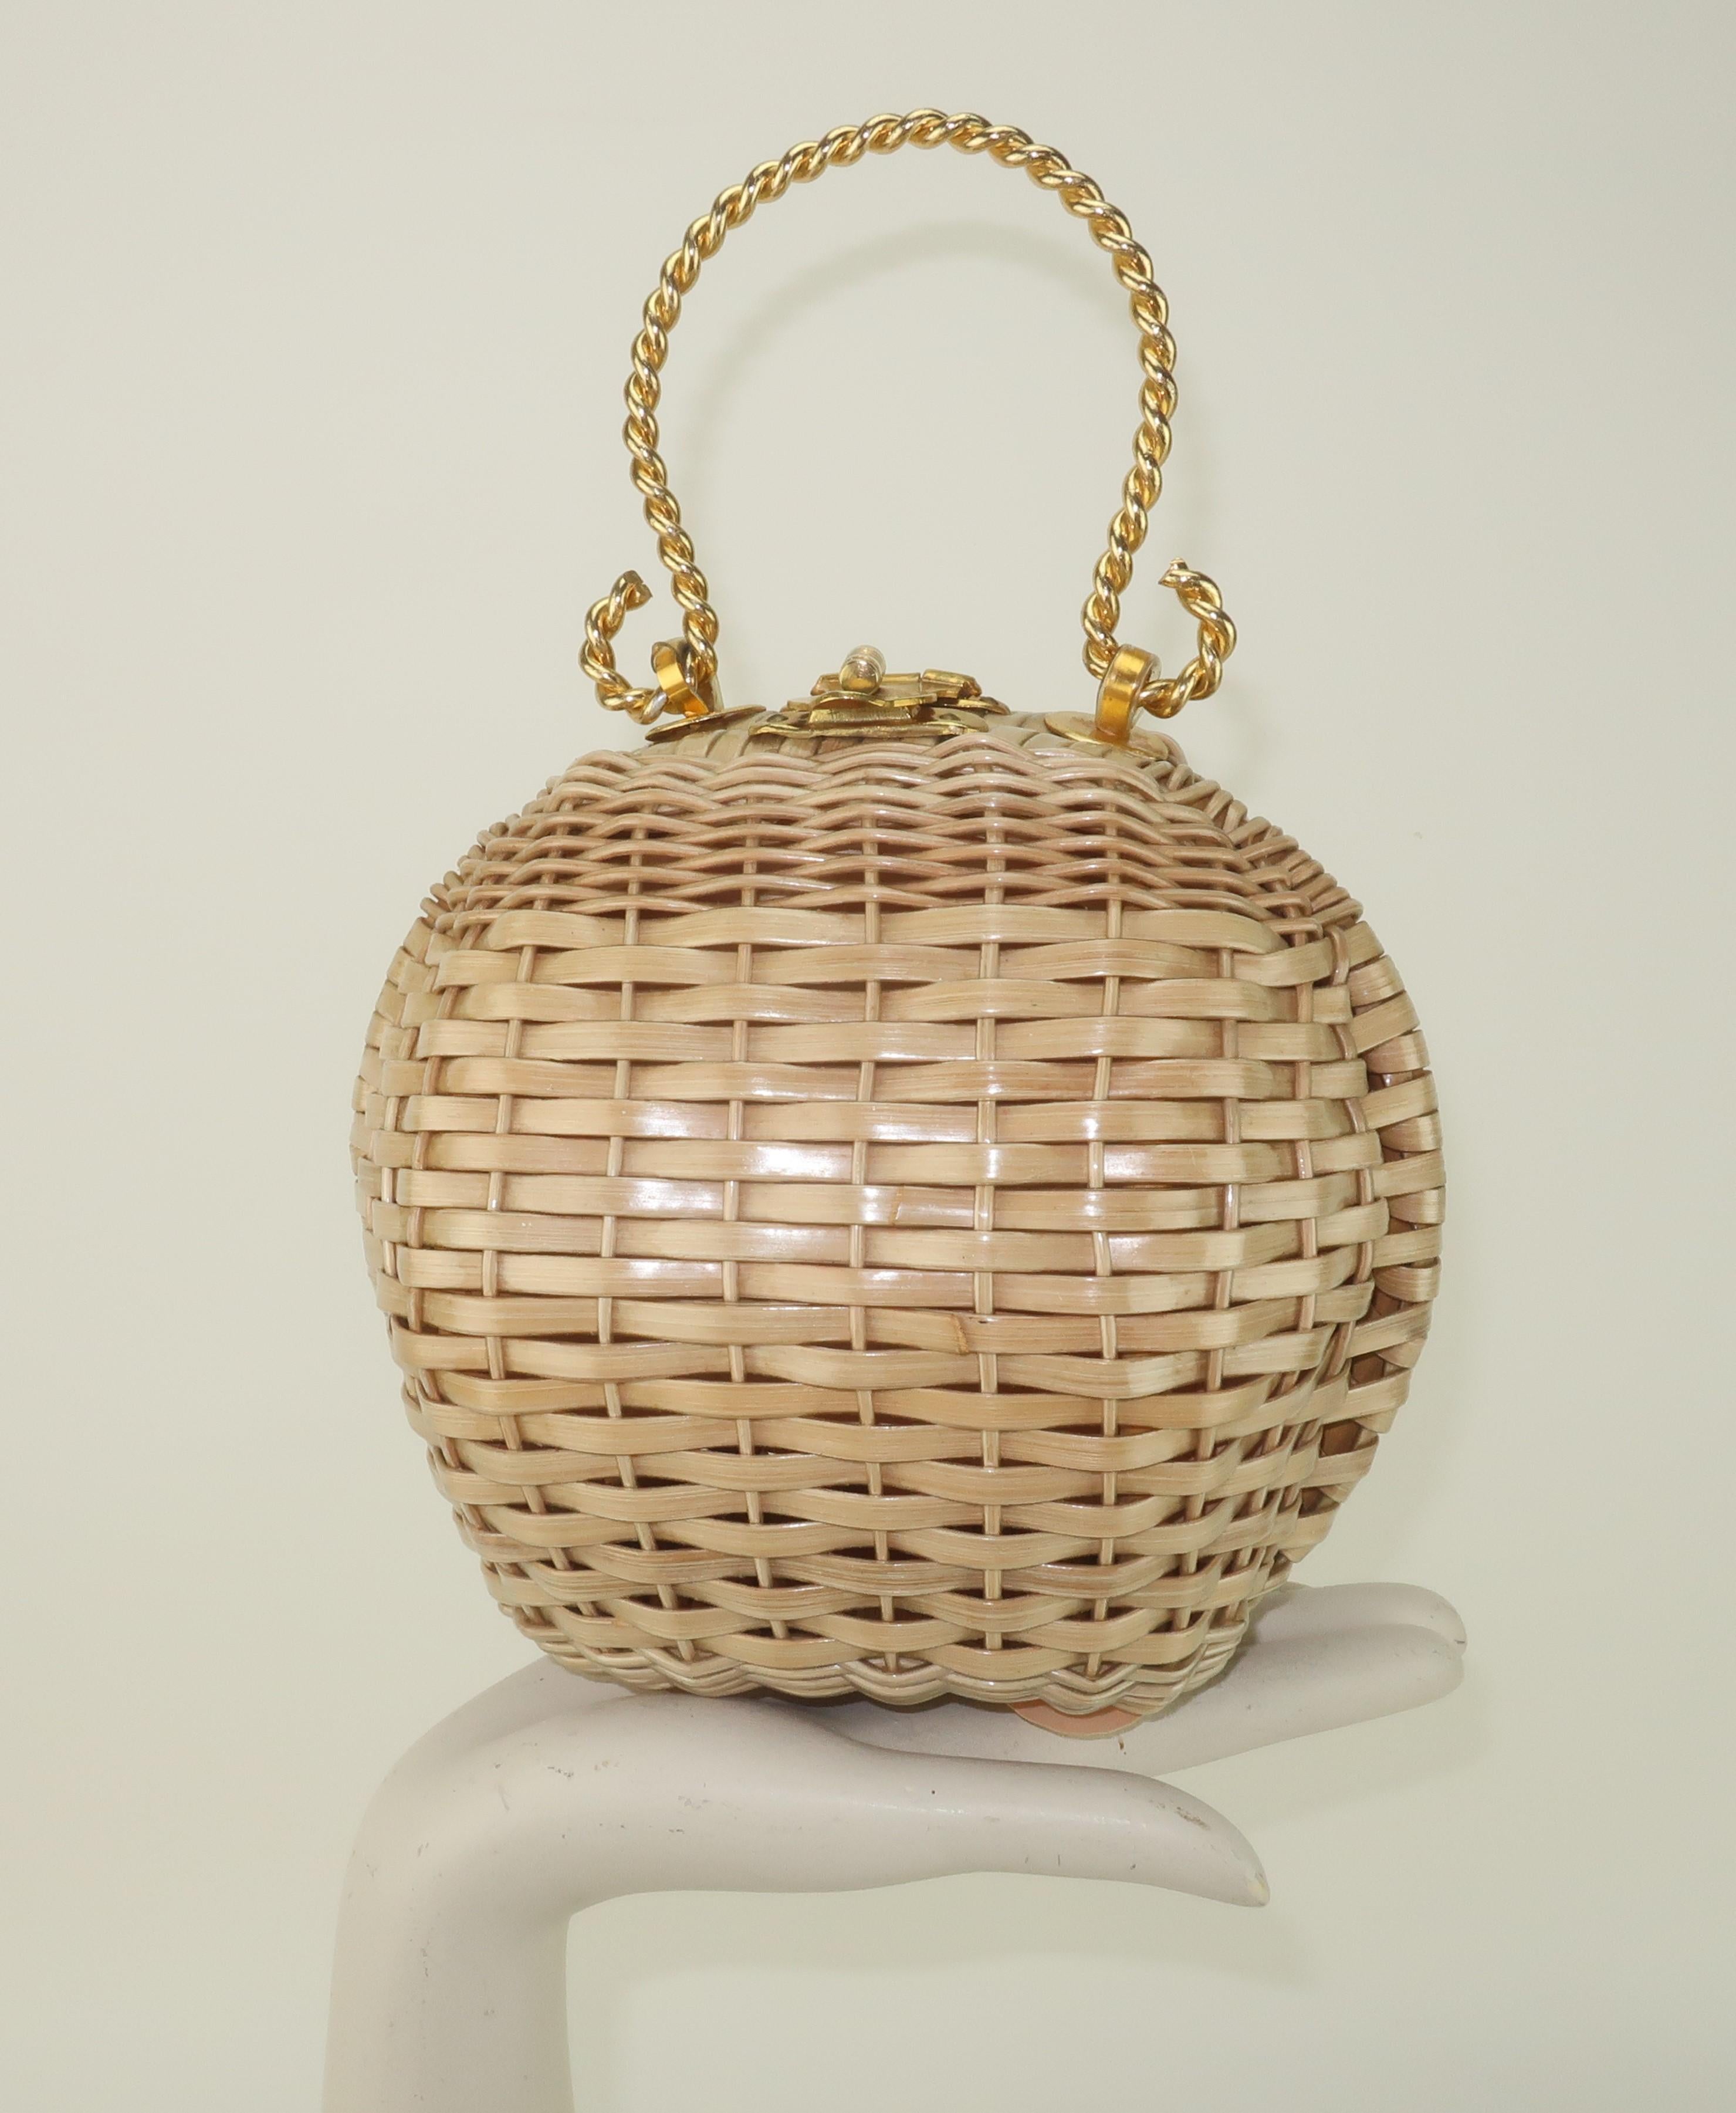 Wicker Ball Shaped Handbag With Gold Handle, 1960's For Sale 8